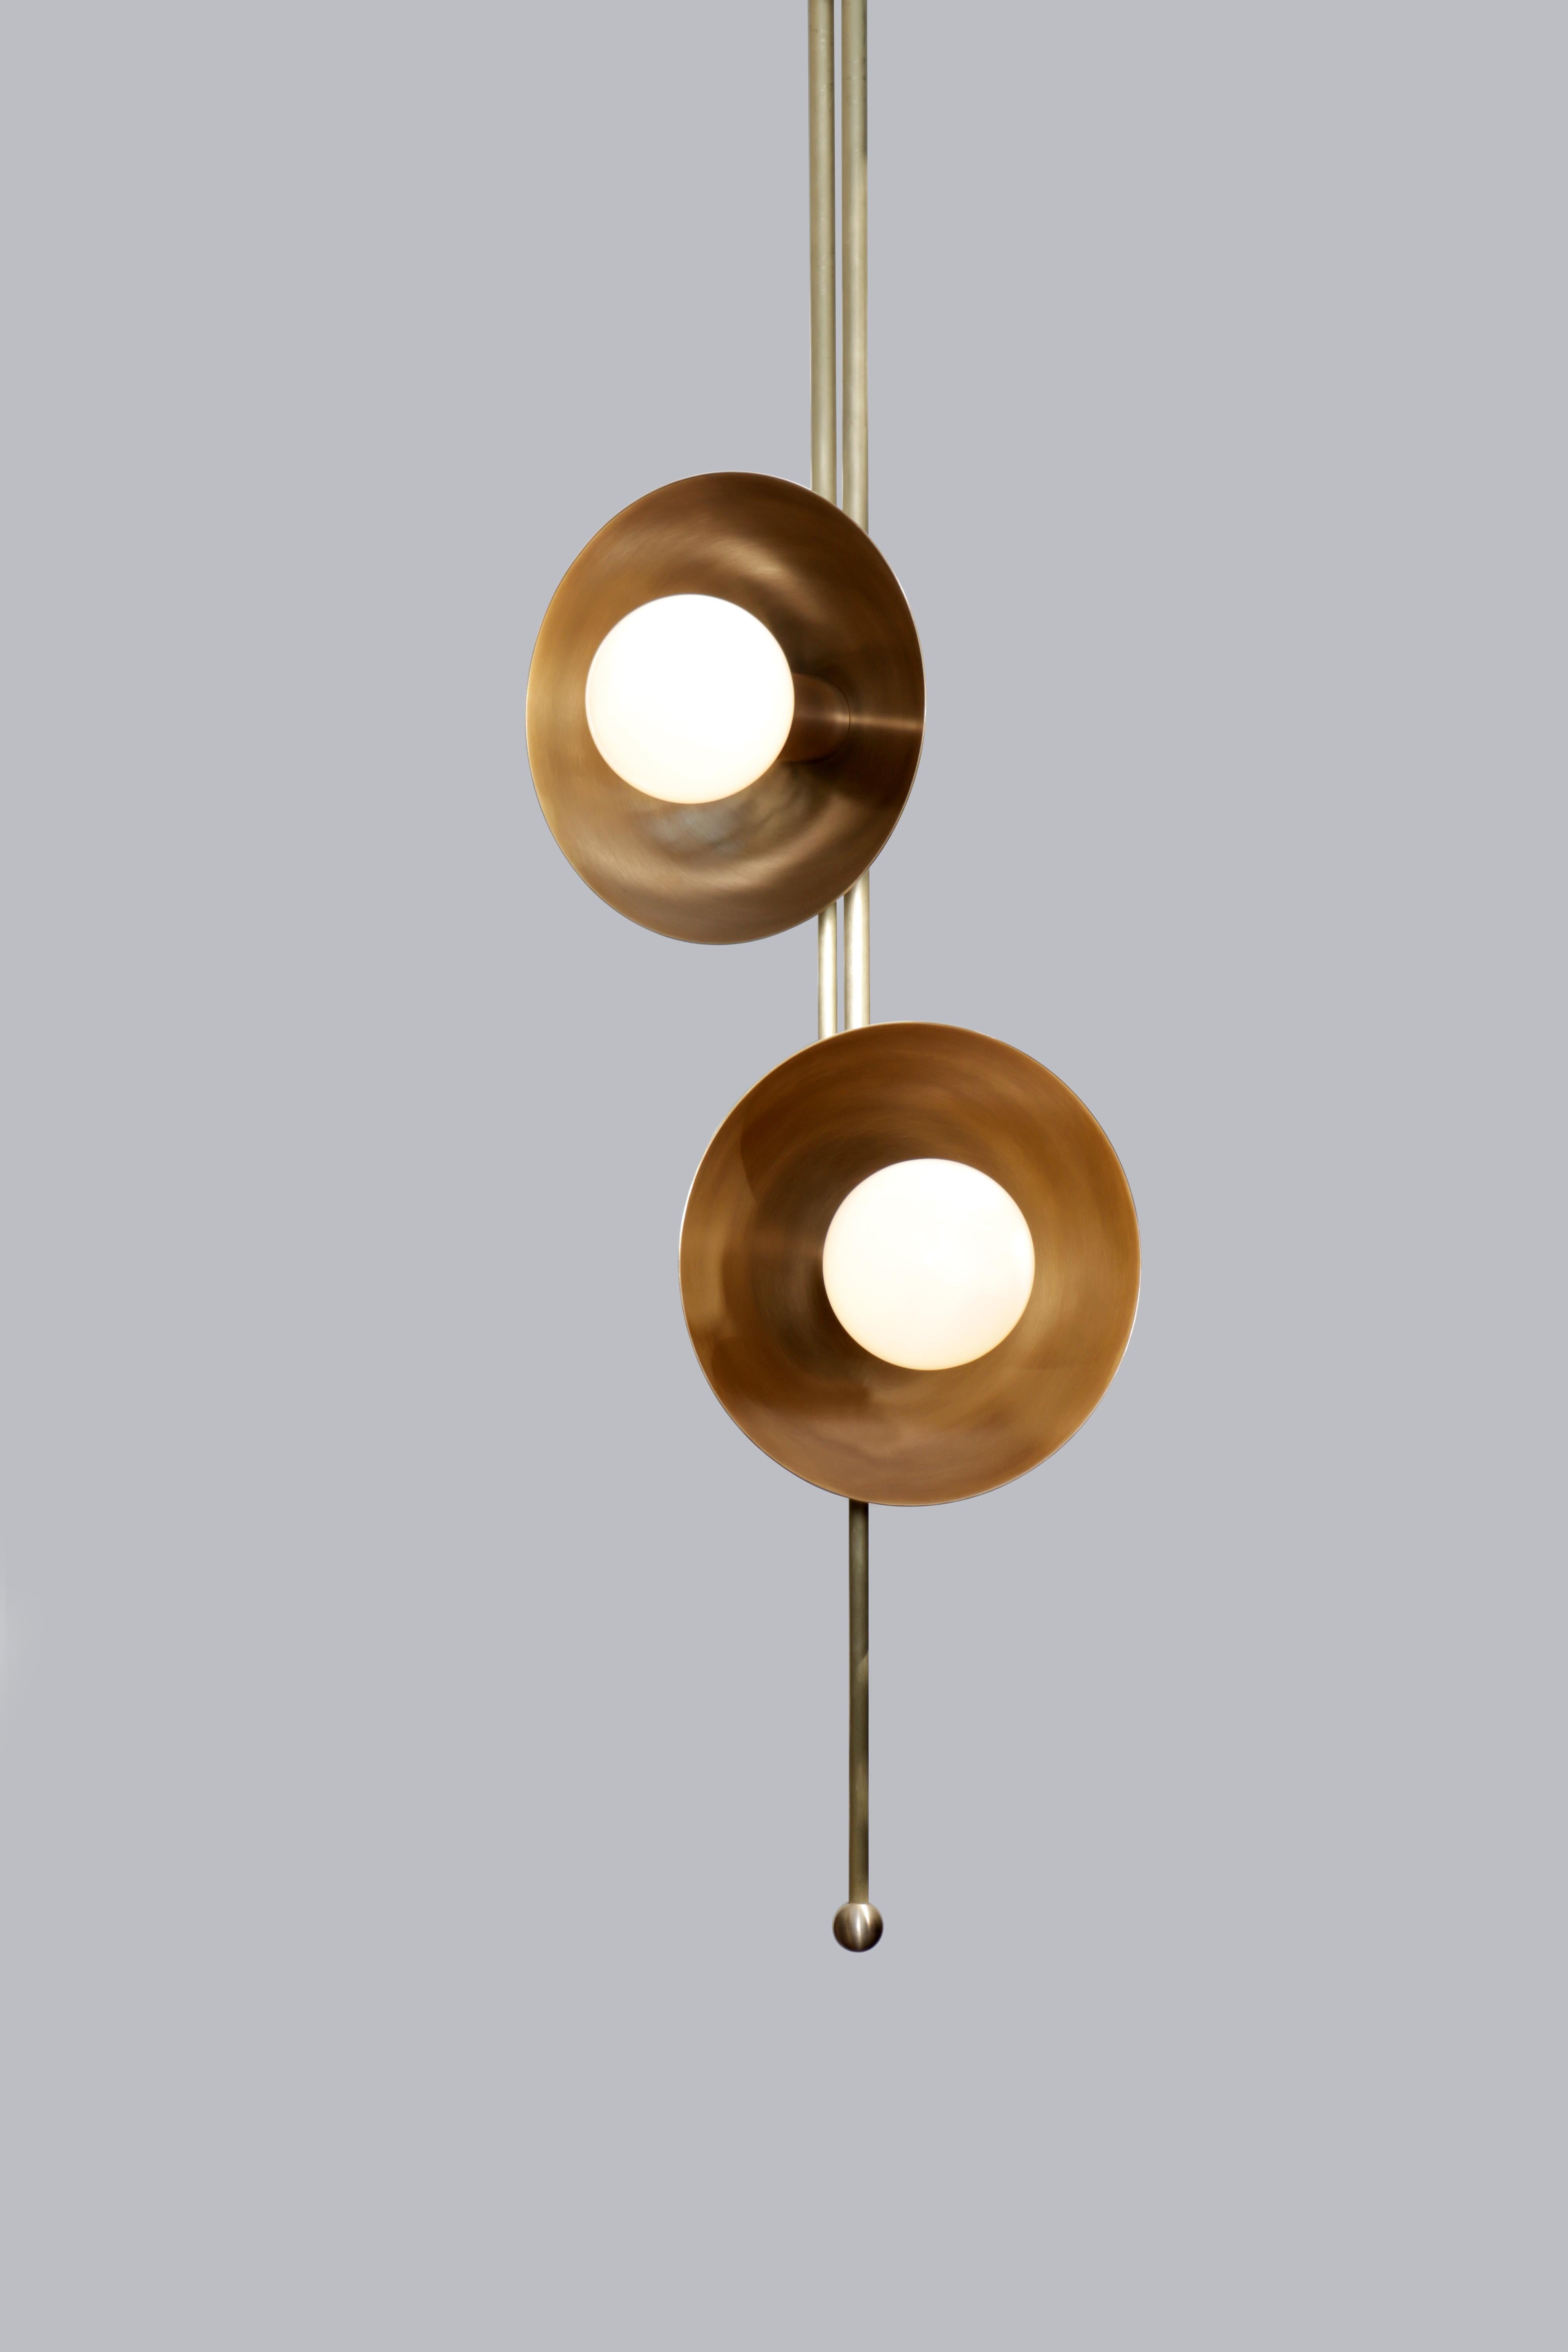 Drop 2 Brass Dome Pendant Lamp by Lamp Shaper
Dimensions: D 43 x W 43 x H 114.5 cm.
Materials: Brass.

Different finishes available: raw brass, aged brass, burnt brass and brushed brass Please contact us.

All our lamps can be wired according to